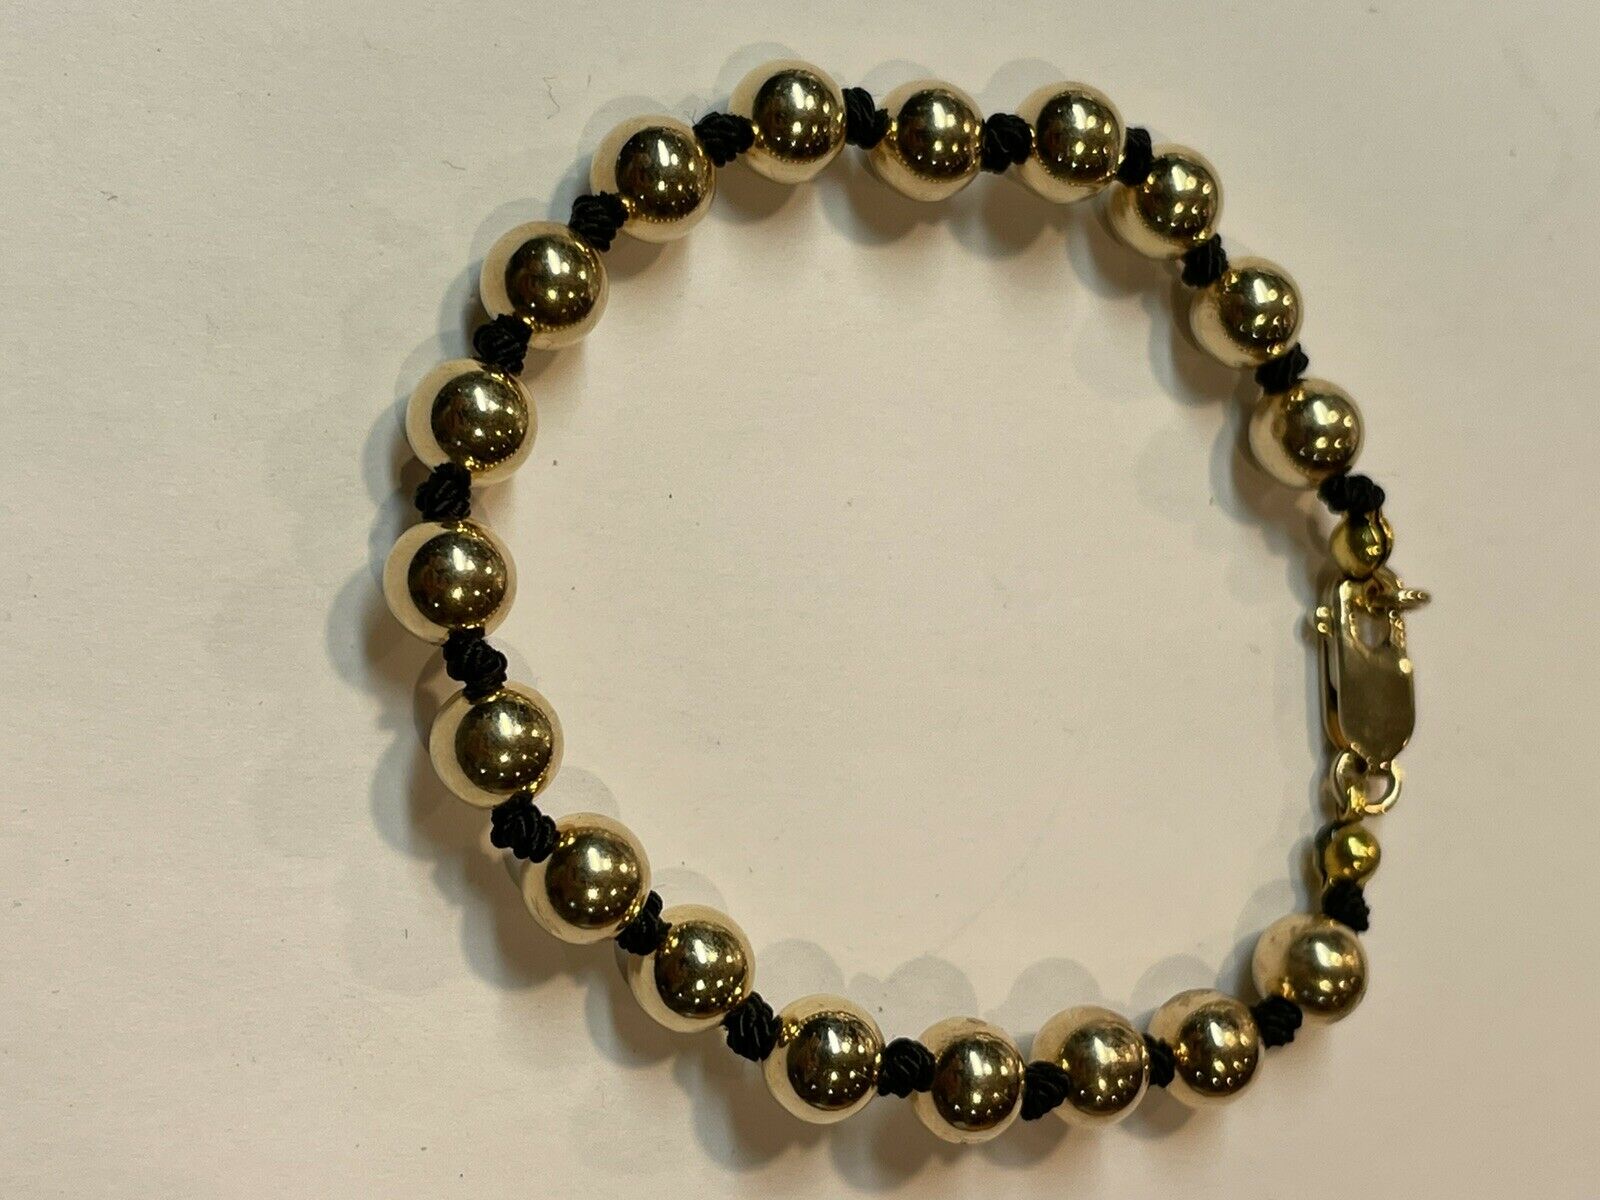 14k Gold Bead And Silk Bracelet with Lobster Clasp 7mm Beads 7”